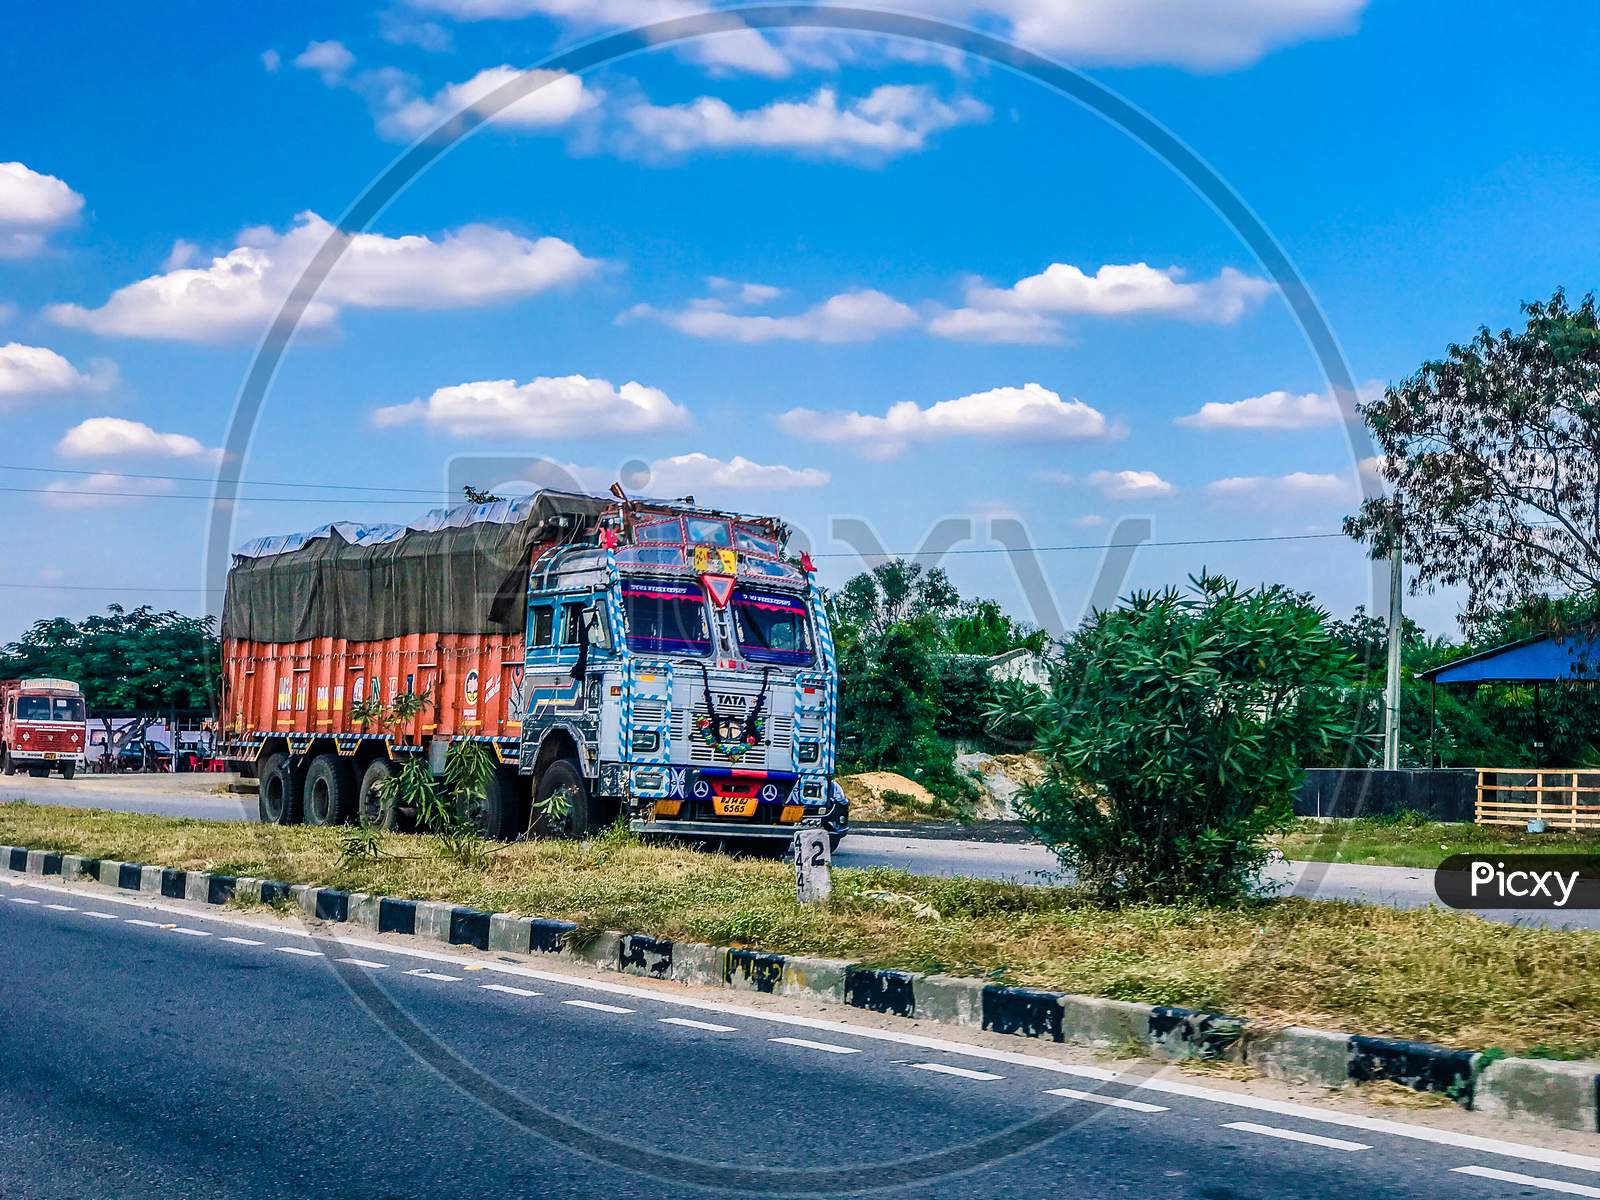 A Lorry moving on National Highway 44, Nagpur Highway